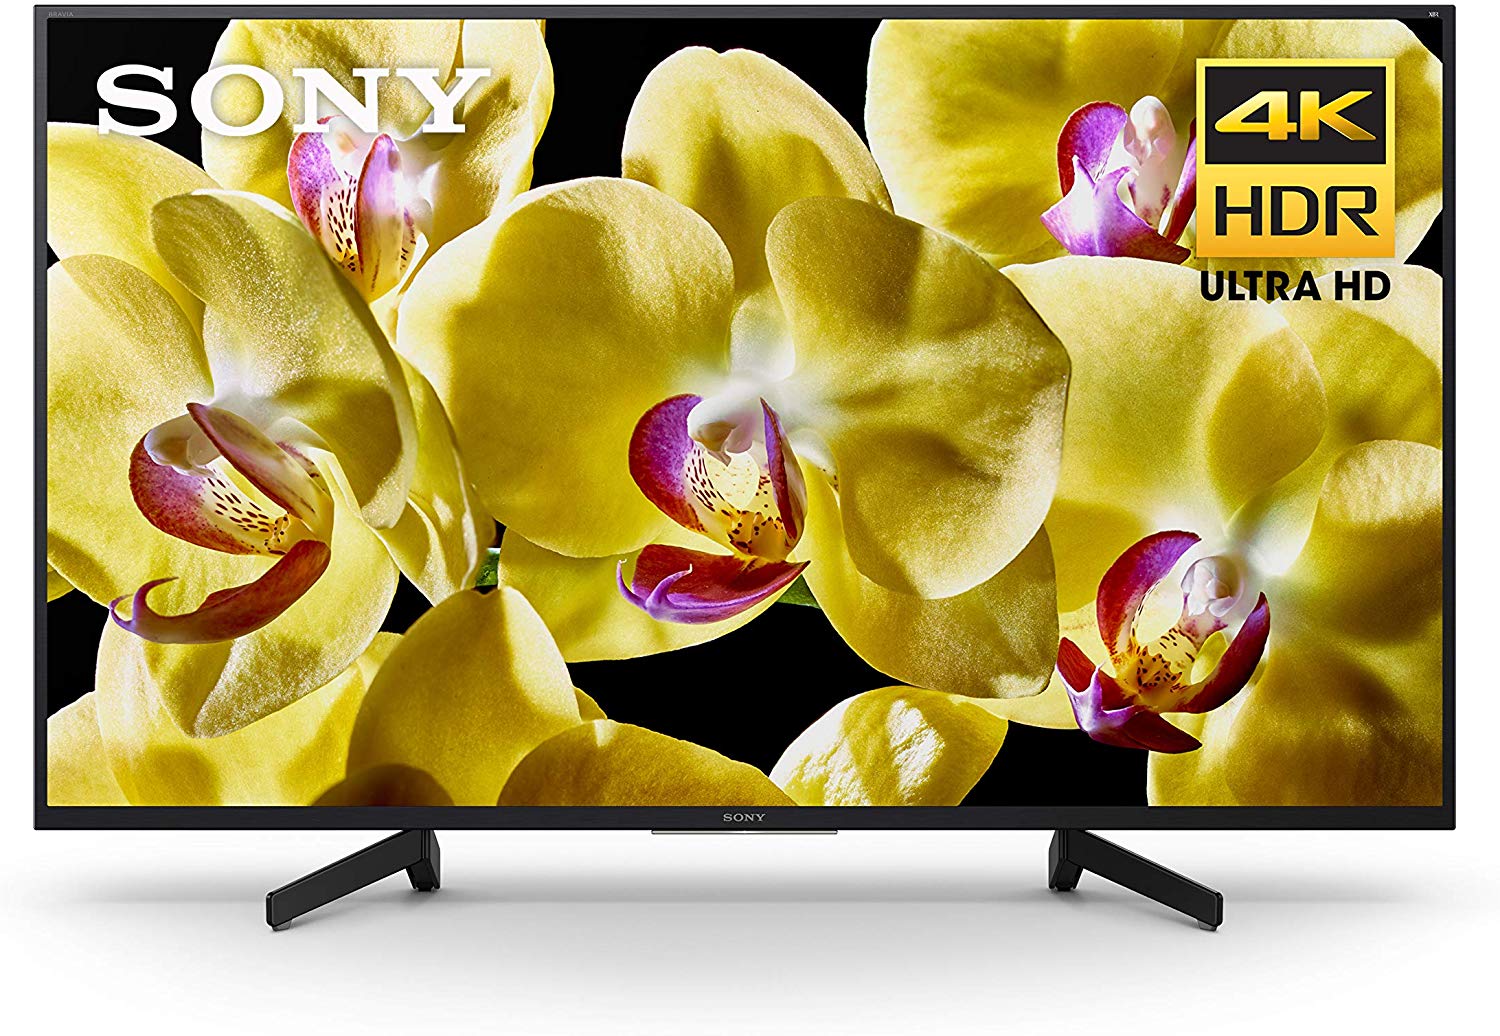 Review of Sony X800G 43 Inch TV: 4K Ultra HD Smart LED TV with HDR and Alexa Compatibility - 2019 Model